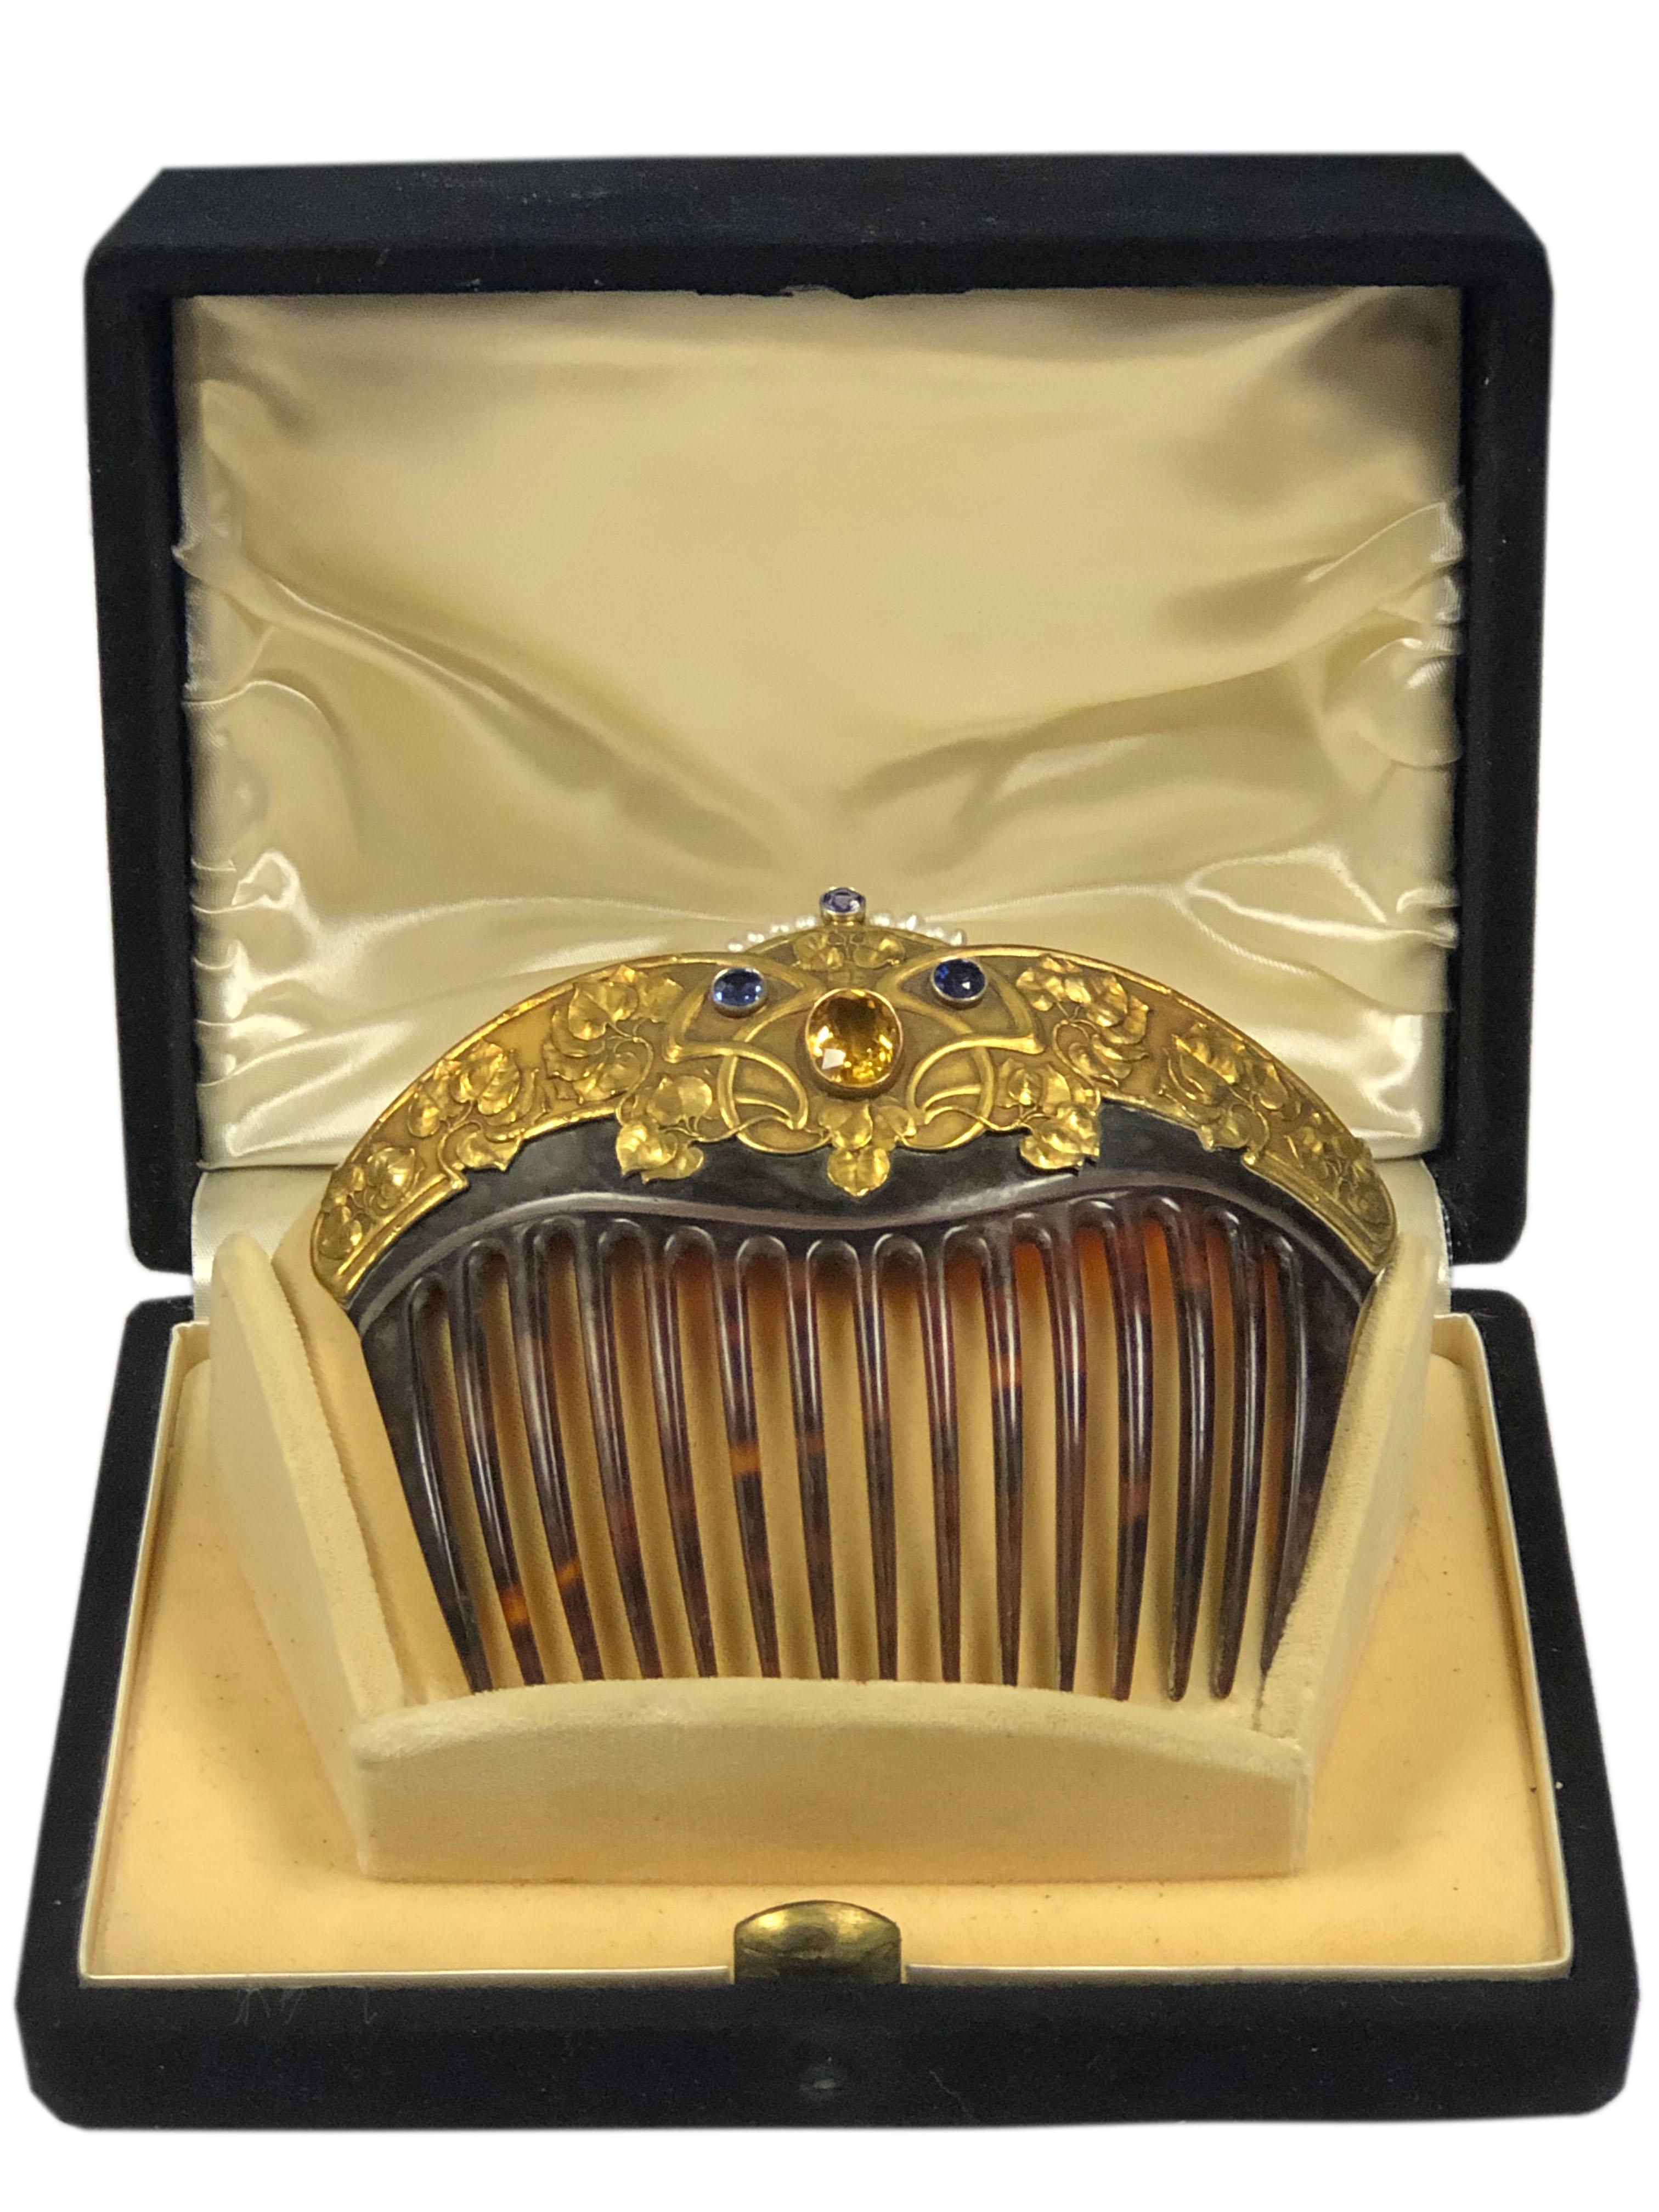 Women's Art Nouveau Large Gold Gemstone and Tortoise Mounted Hair Comb by Carter Gough For Sale